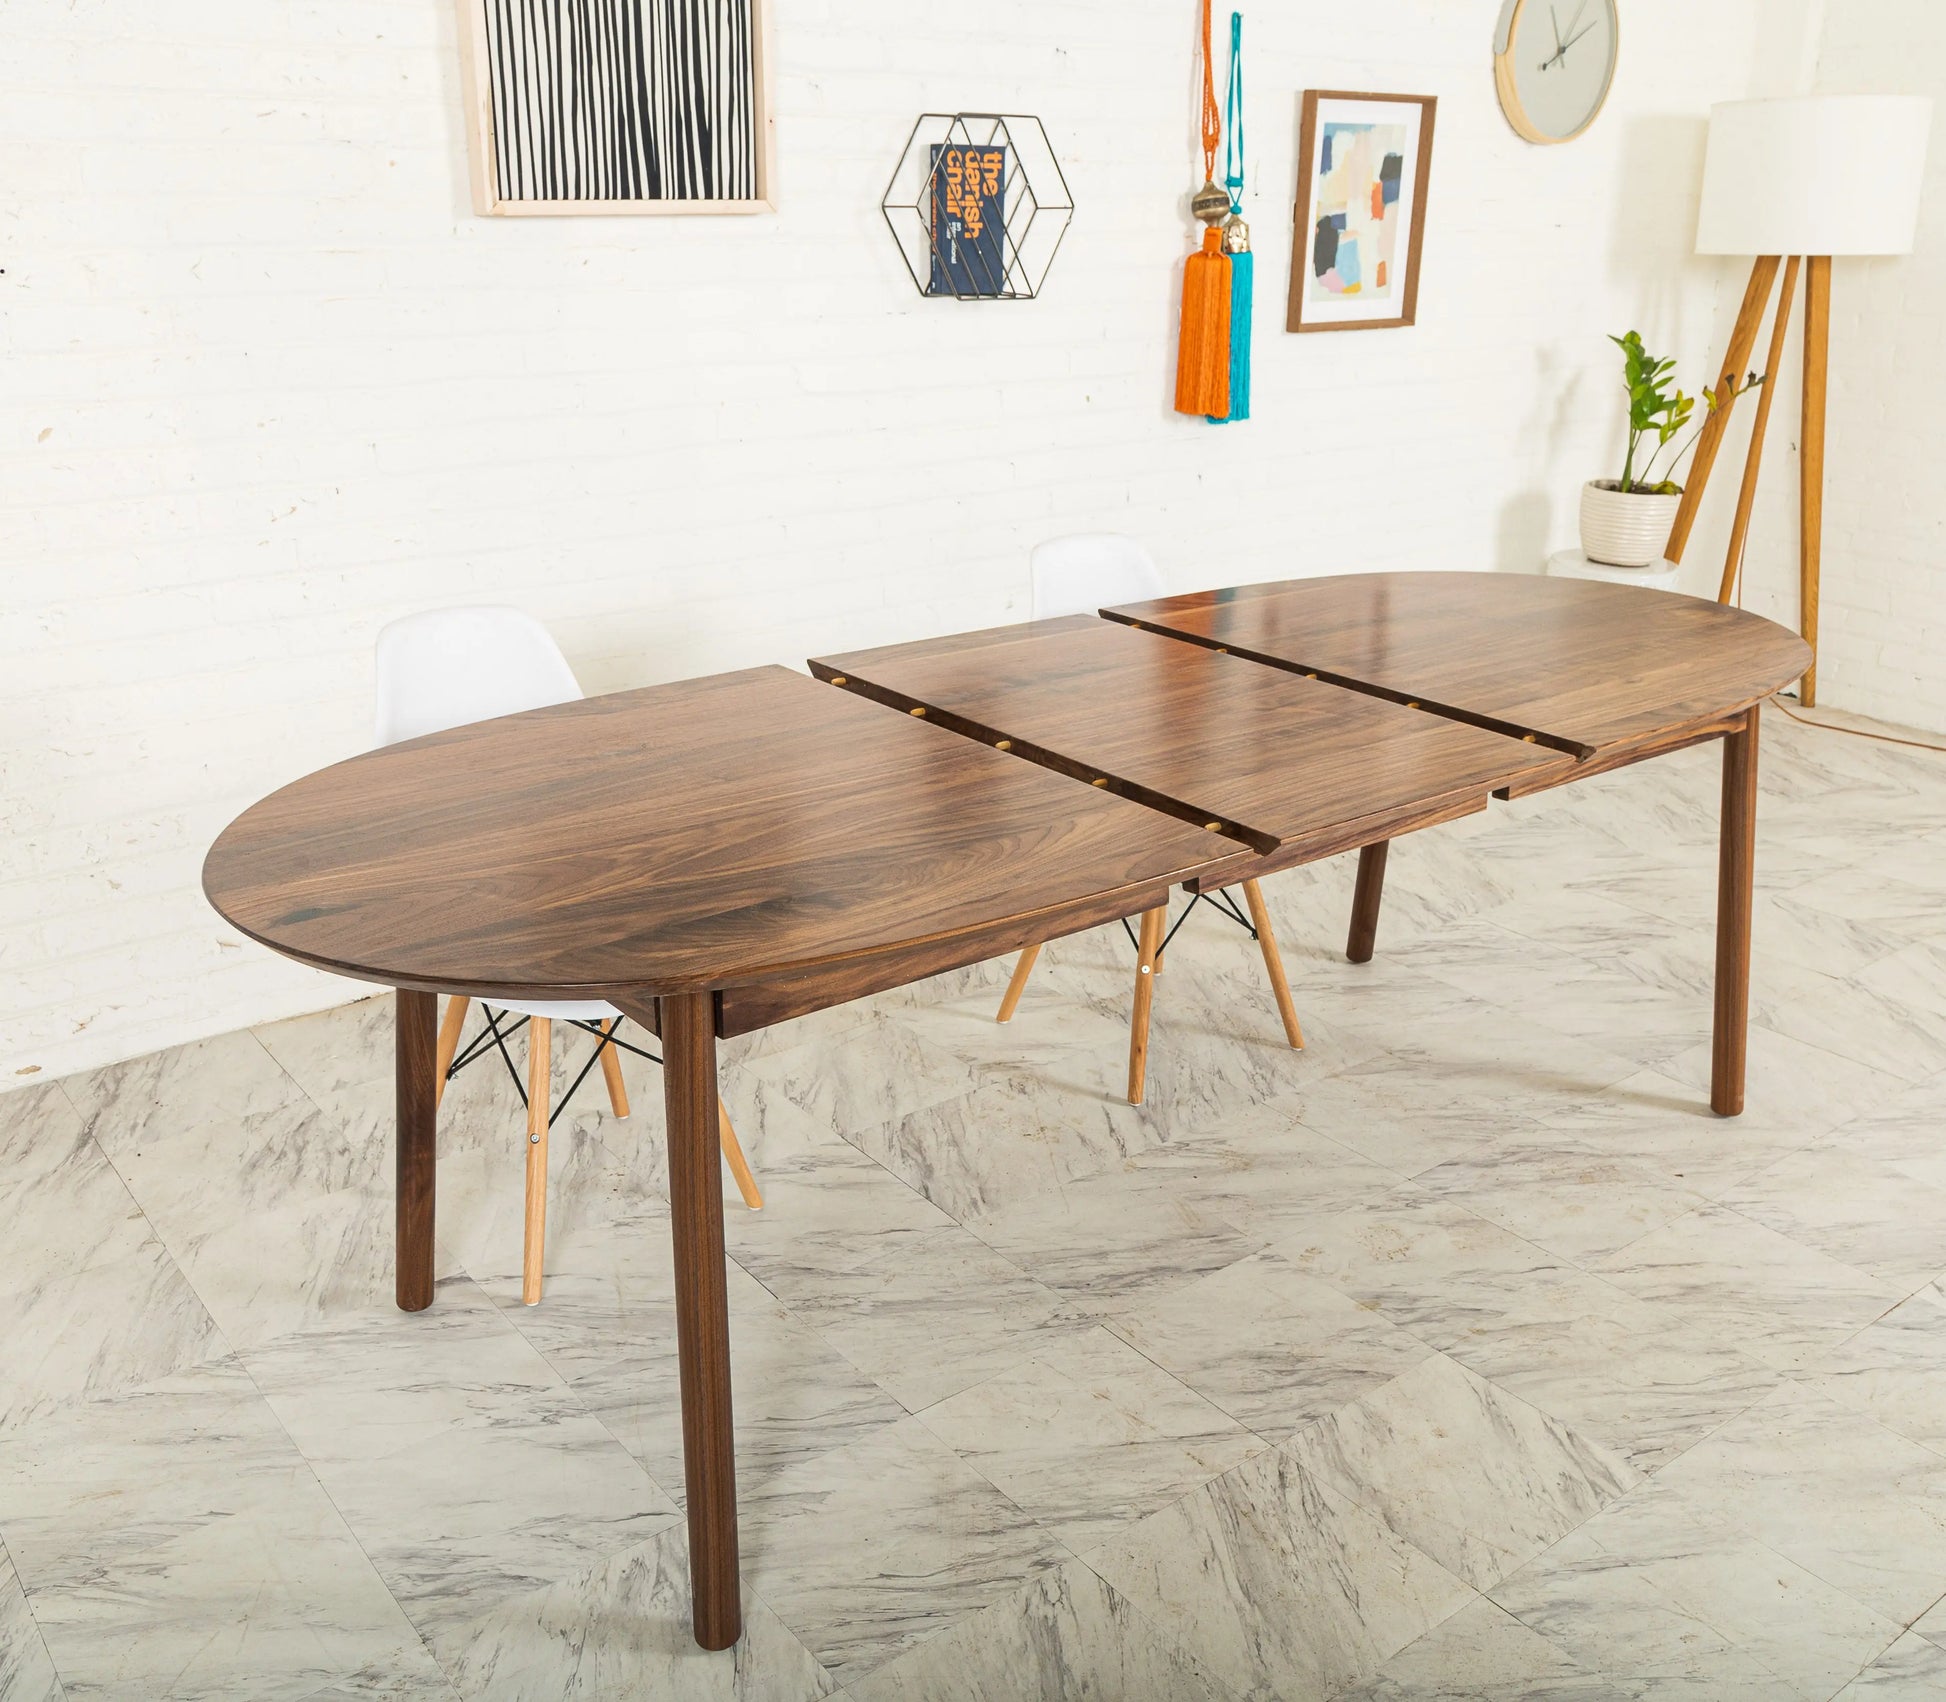 Payne oval extendable dining table in its full extended form, seating 6-8